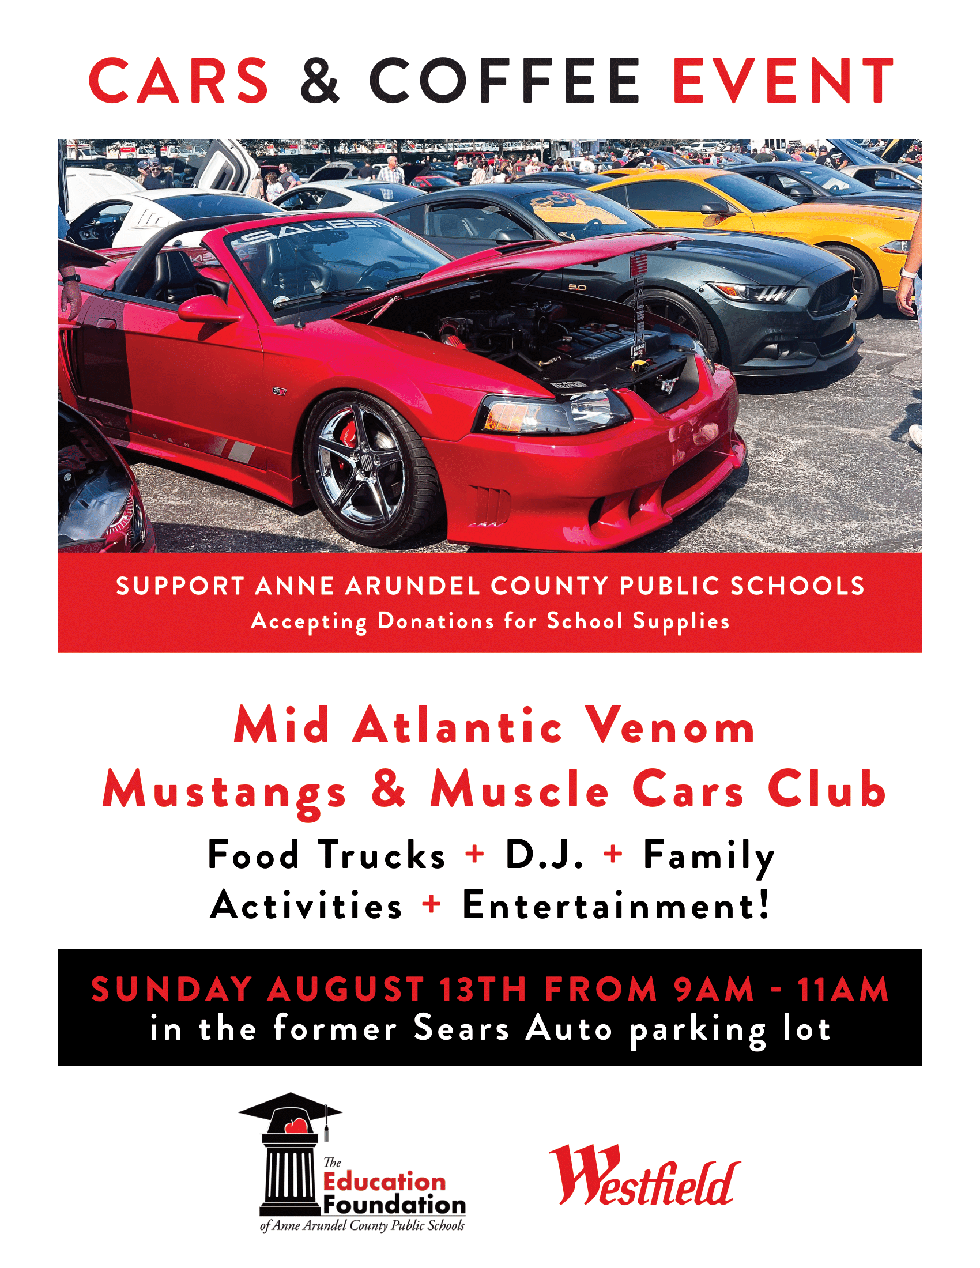 WESTF 23-02 Coffee & Cars Event Flyer -1.png